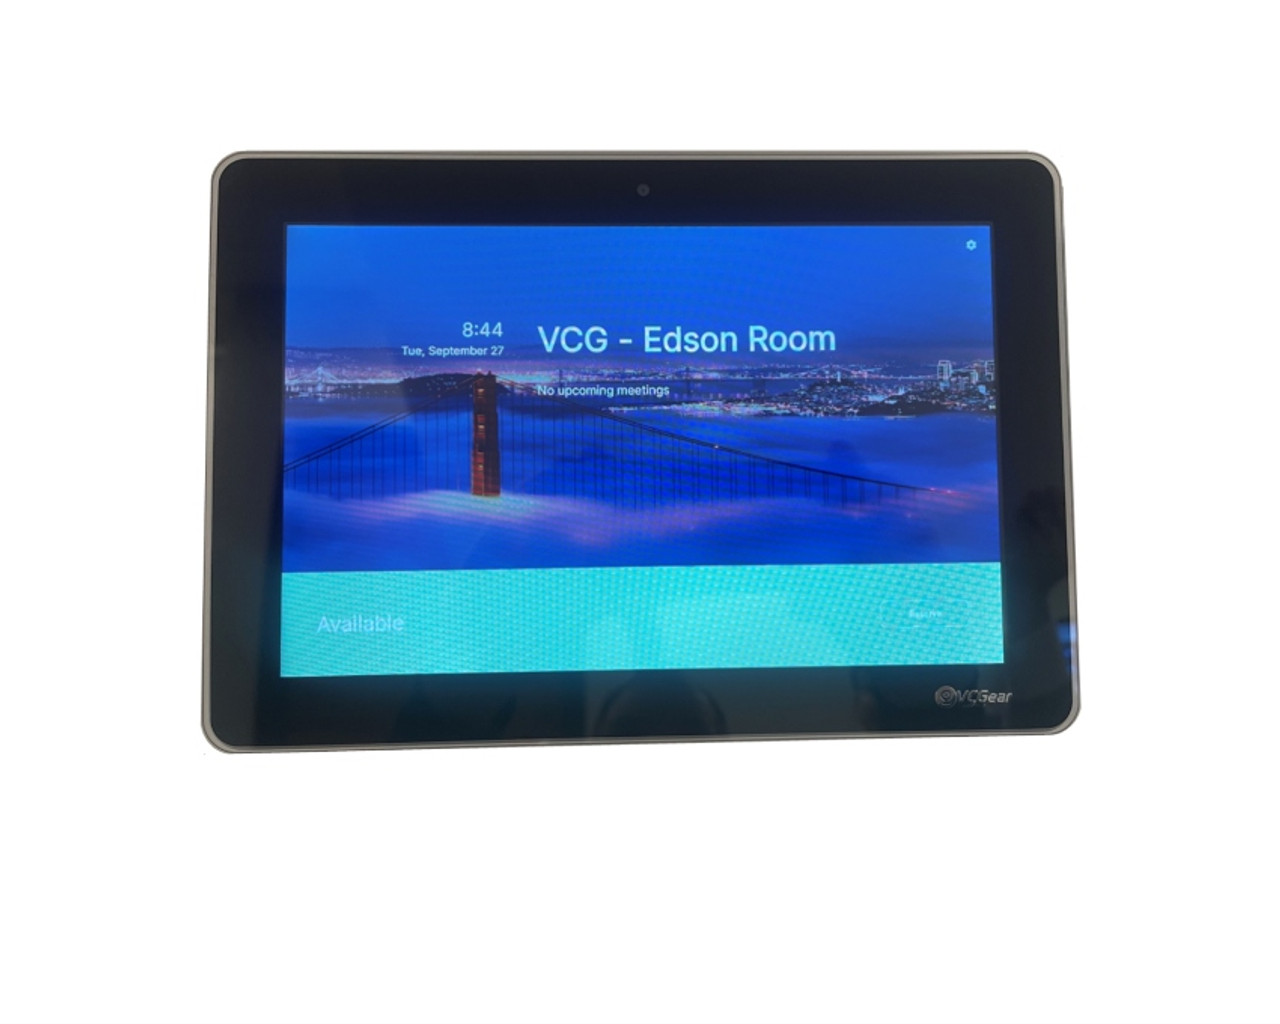 Conference Room Schedule LCD Display:The Best Conference Room Schedule LCD Displays